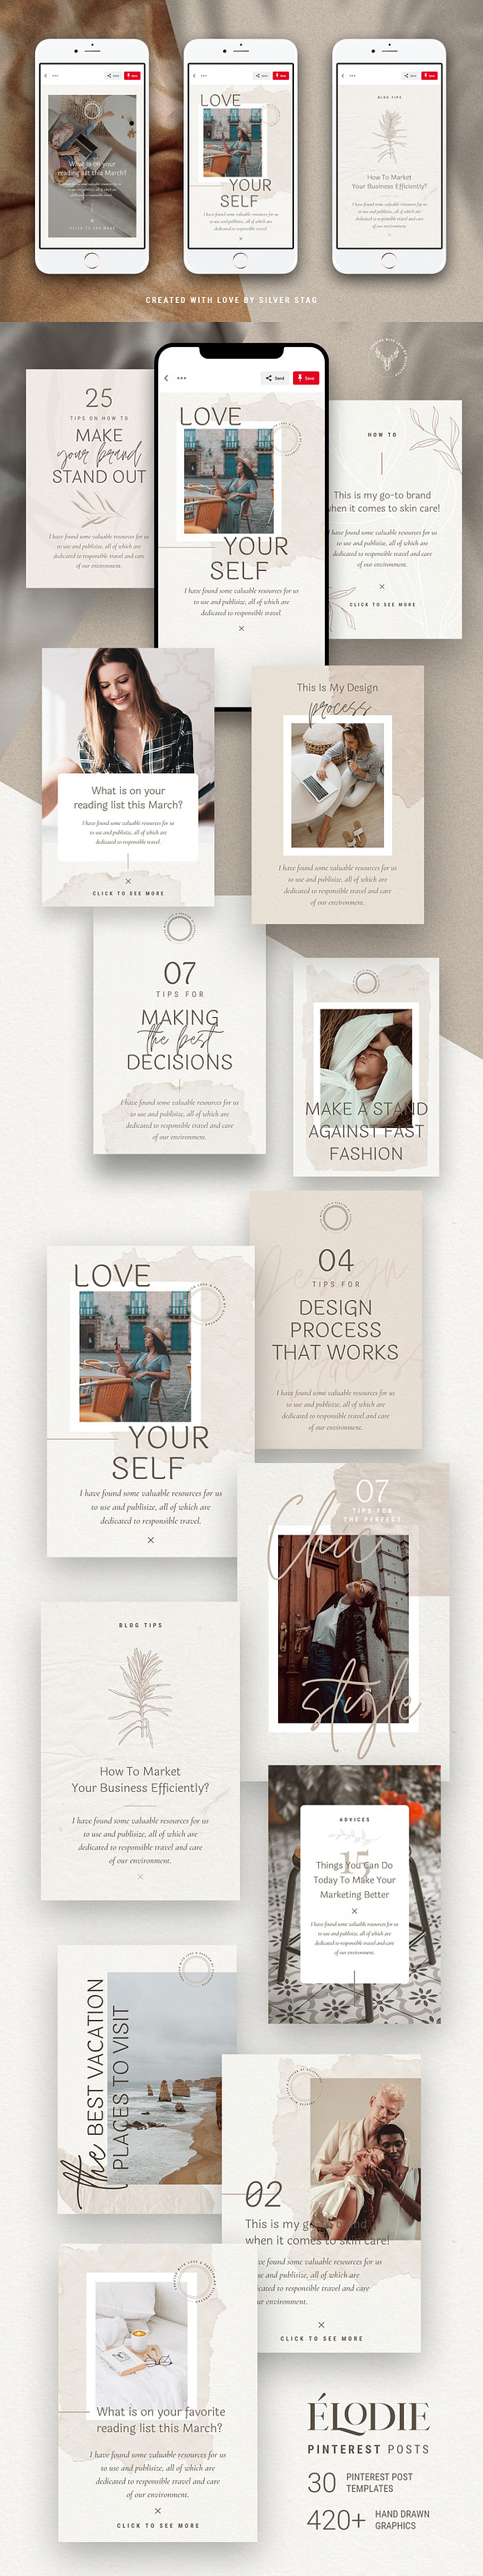 Elodie - Canva Pinterest Templates in Pinterest Templates - product preview 18